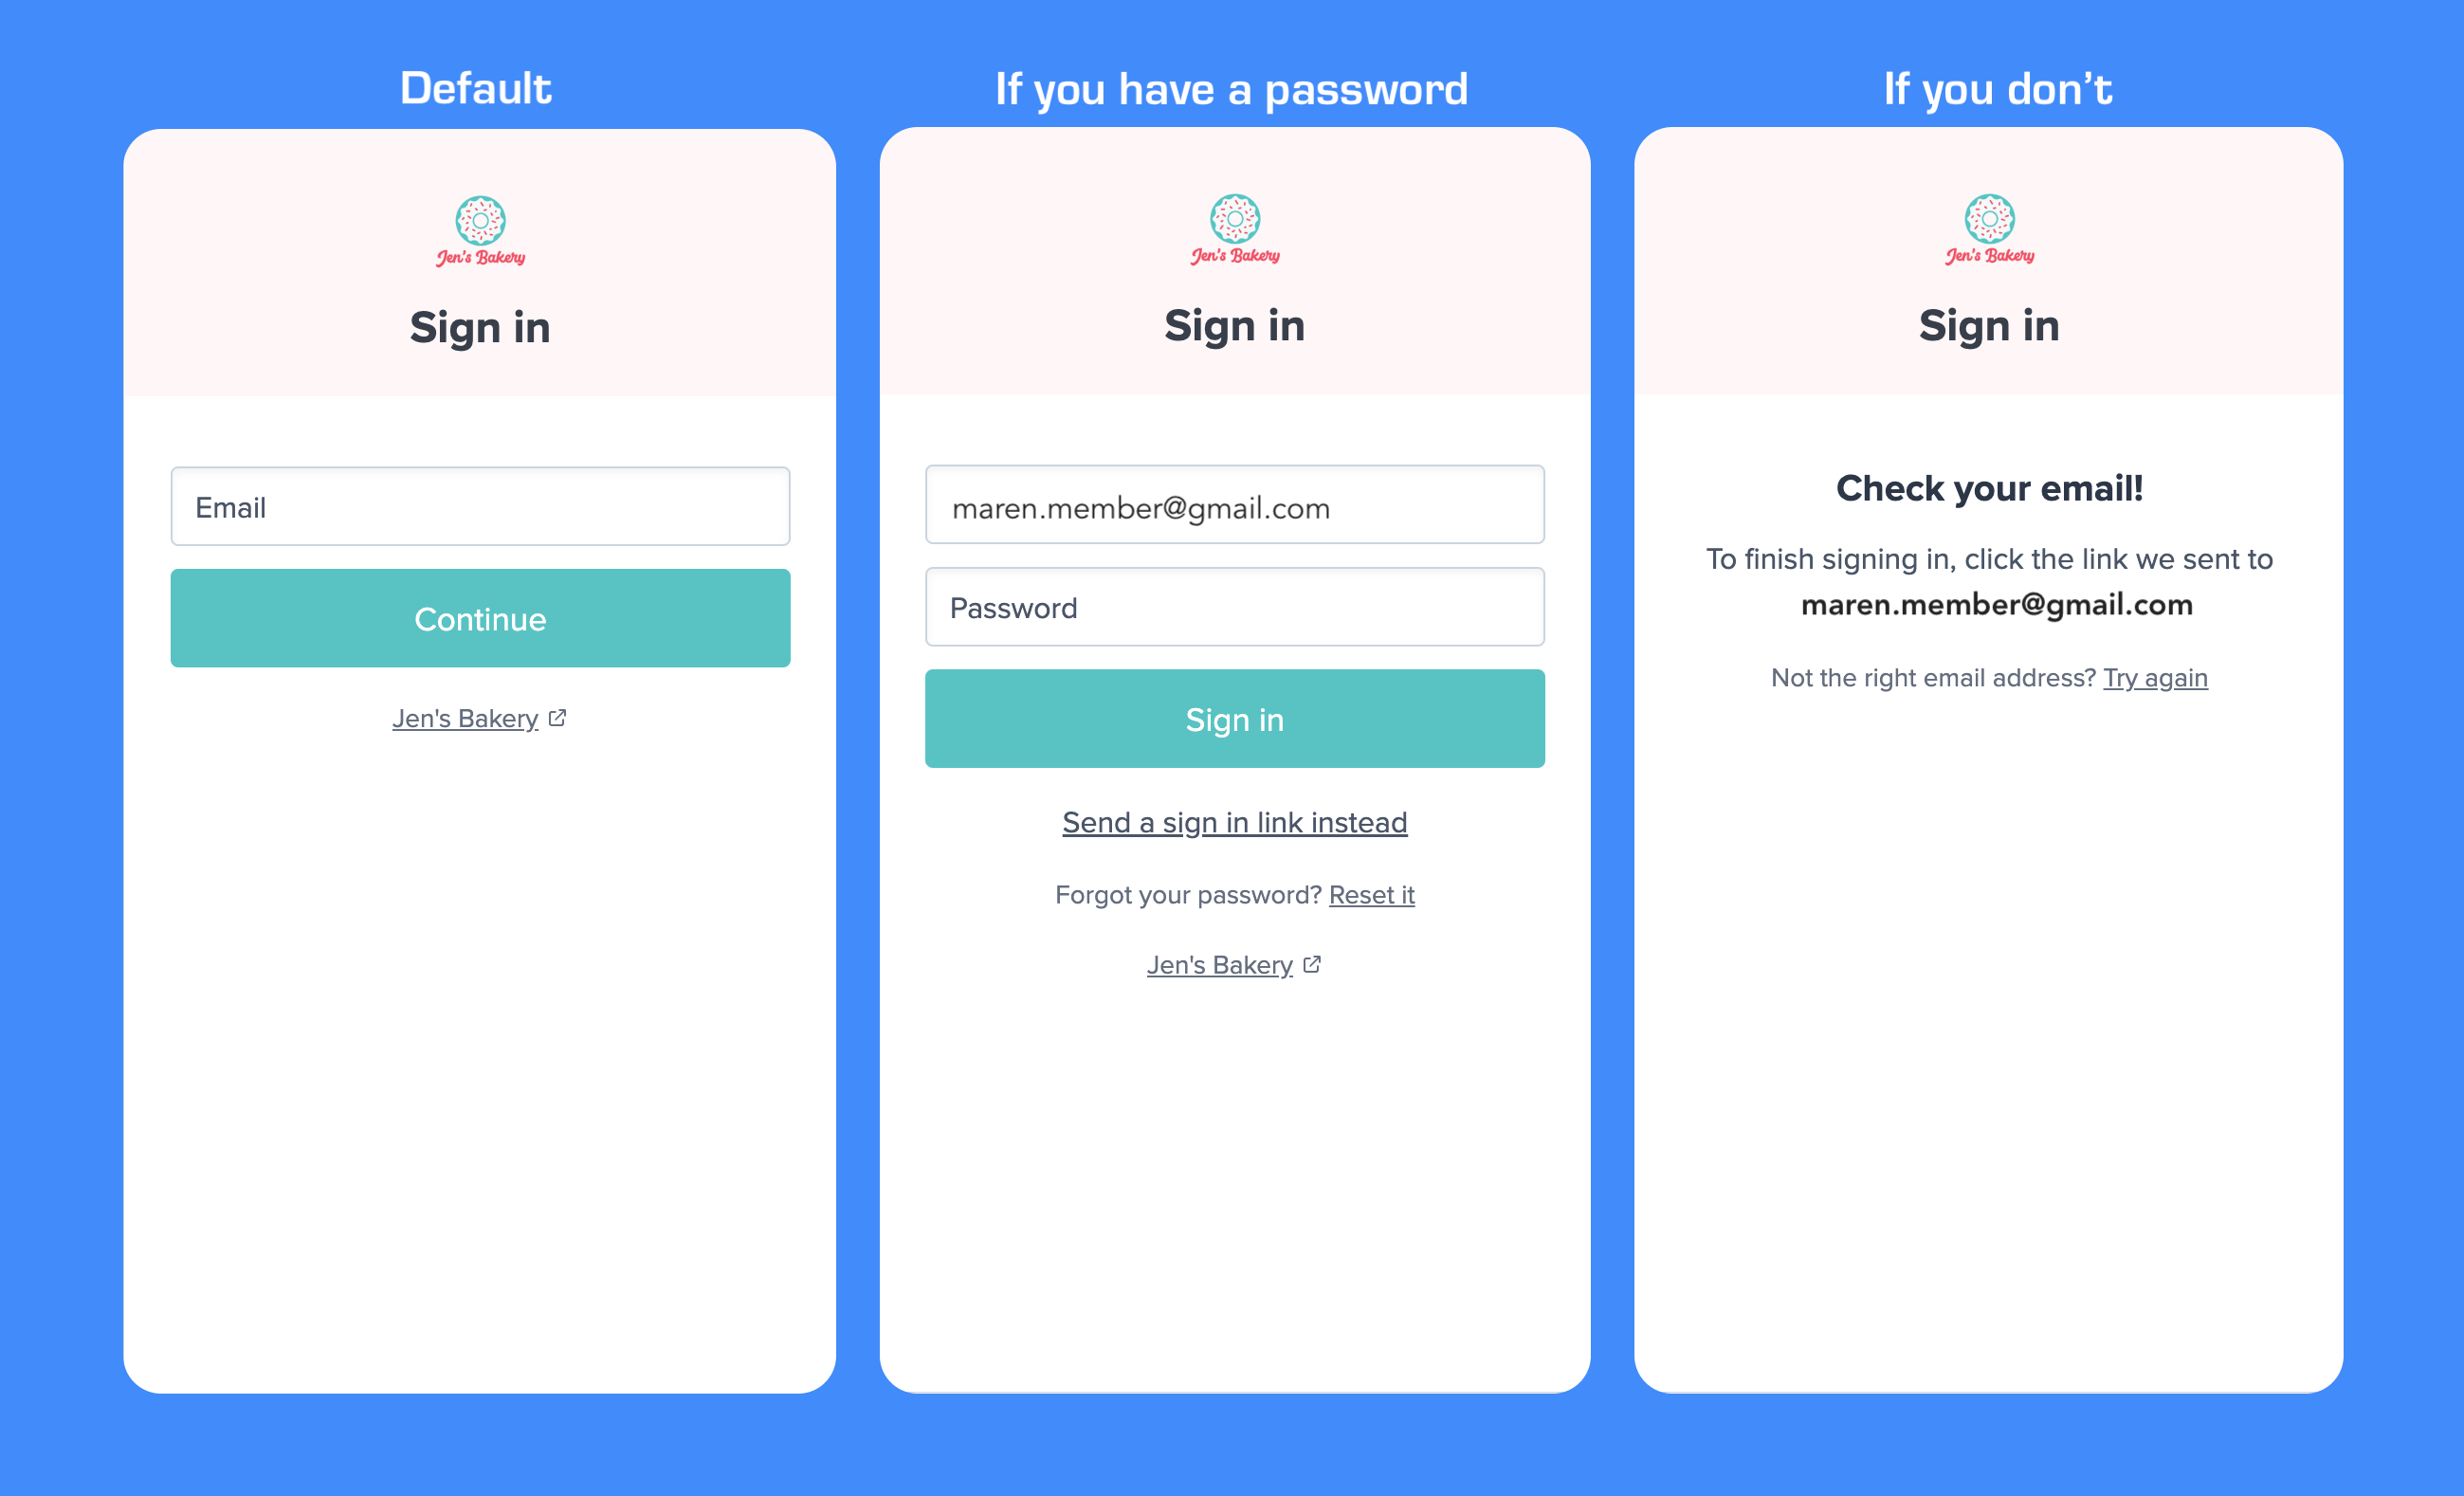 Sign-in improvements